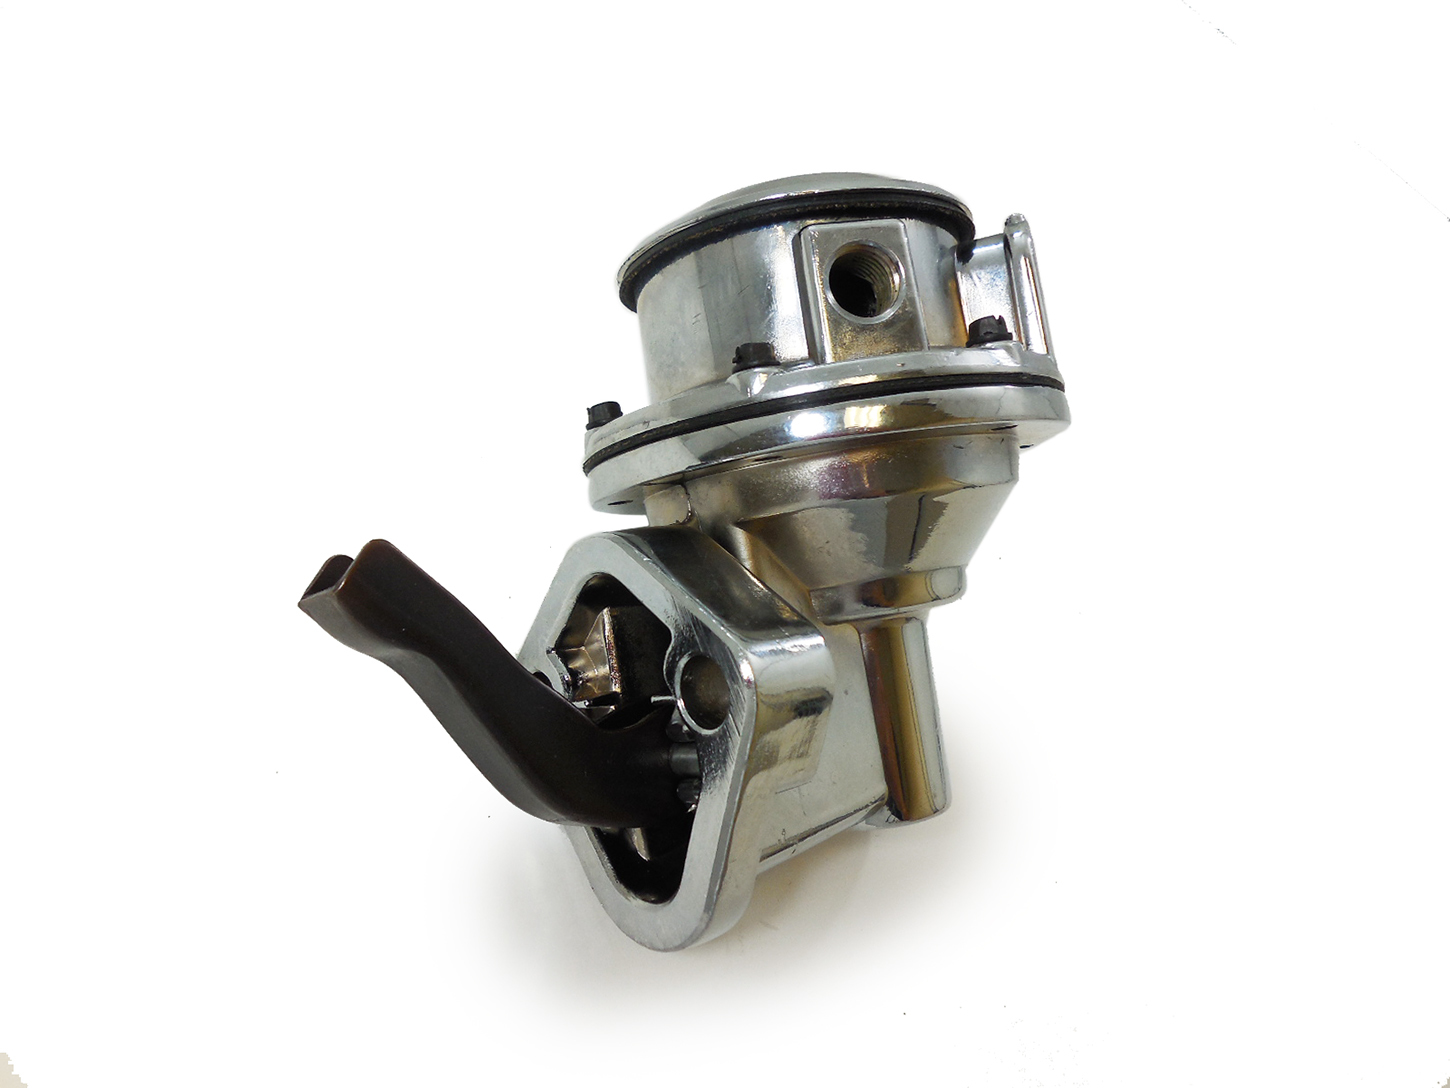 Racing Power Company R2303C Fuel Pump, Mechanical, 80 gph, 8 psi, 1/4 in NPT Female Inlet / Outlet, Aluminum, Chrome, Gas, Big Block Chevy, Each